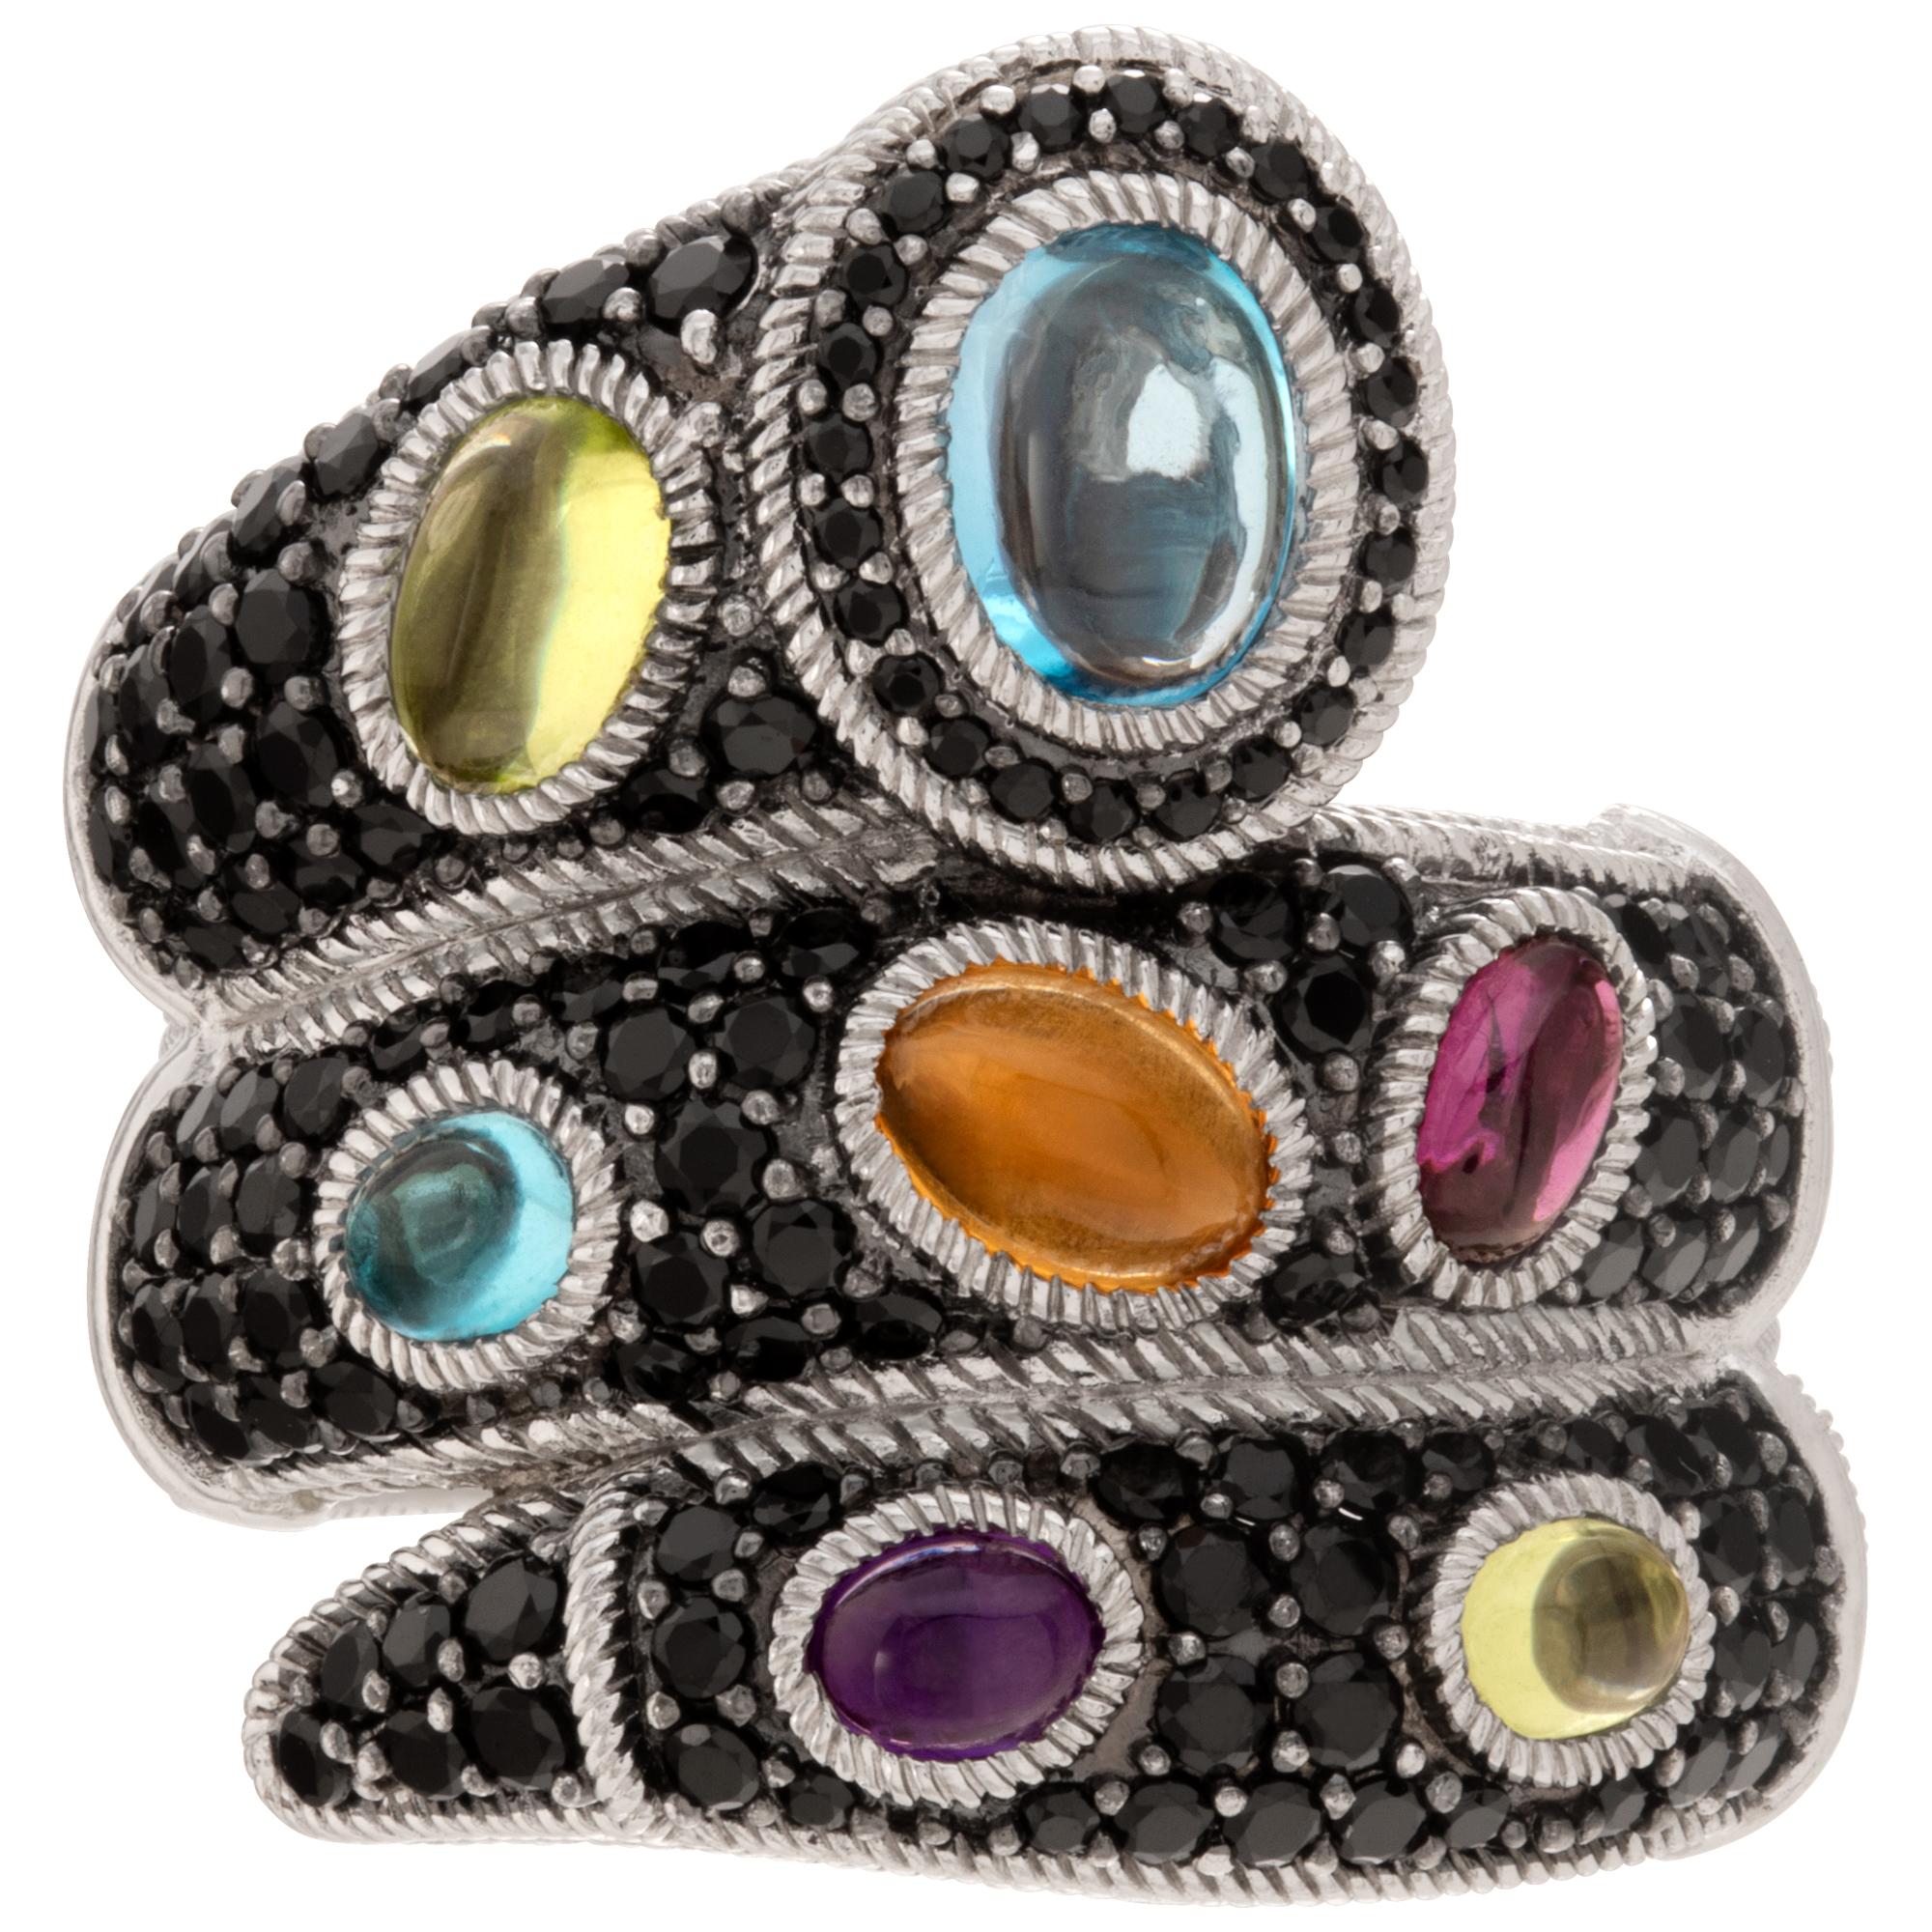 Judith Ripka ring with black spinel and multi-colored gemstones in sterling silver. Size 11, head 26mm thick, shank 9mm thick.This Judith Ripka ring is currently size 11 and some items can be sized up or down, please ask! It weighs 11.6 pennyweights